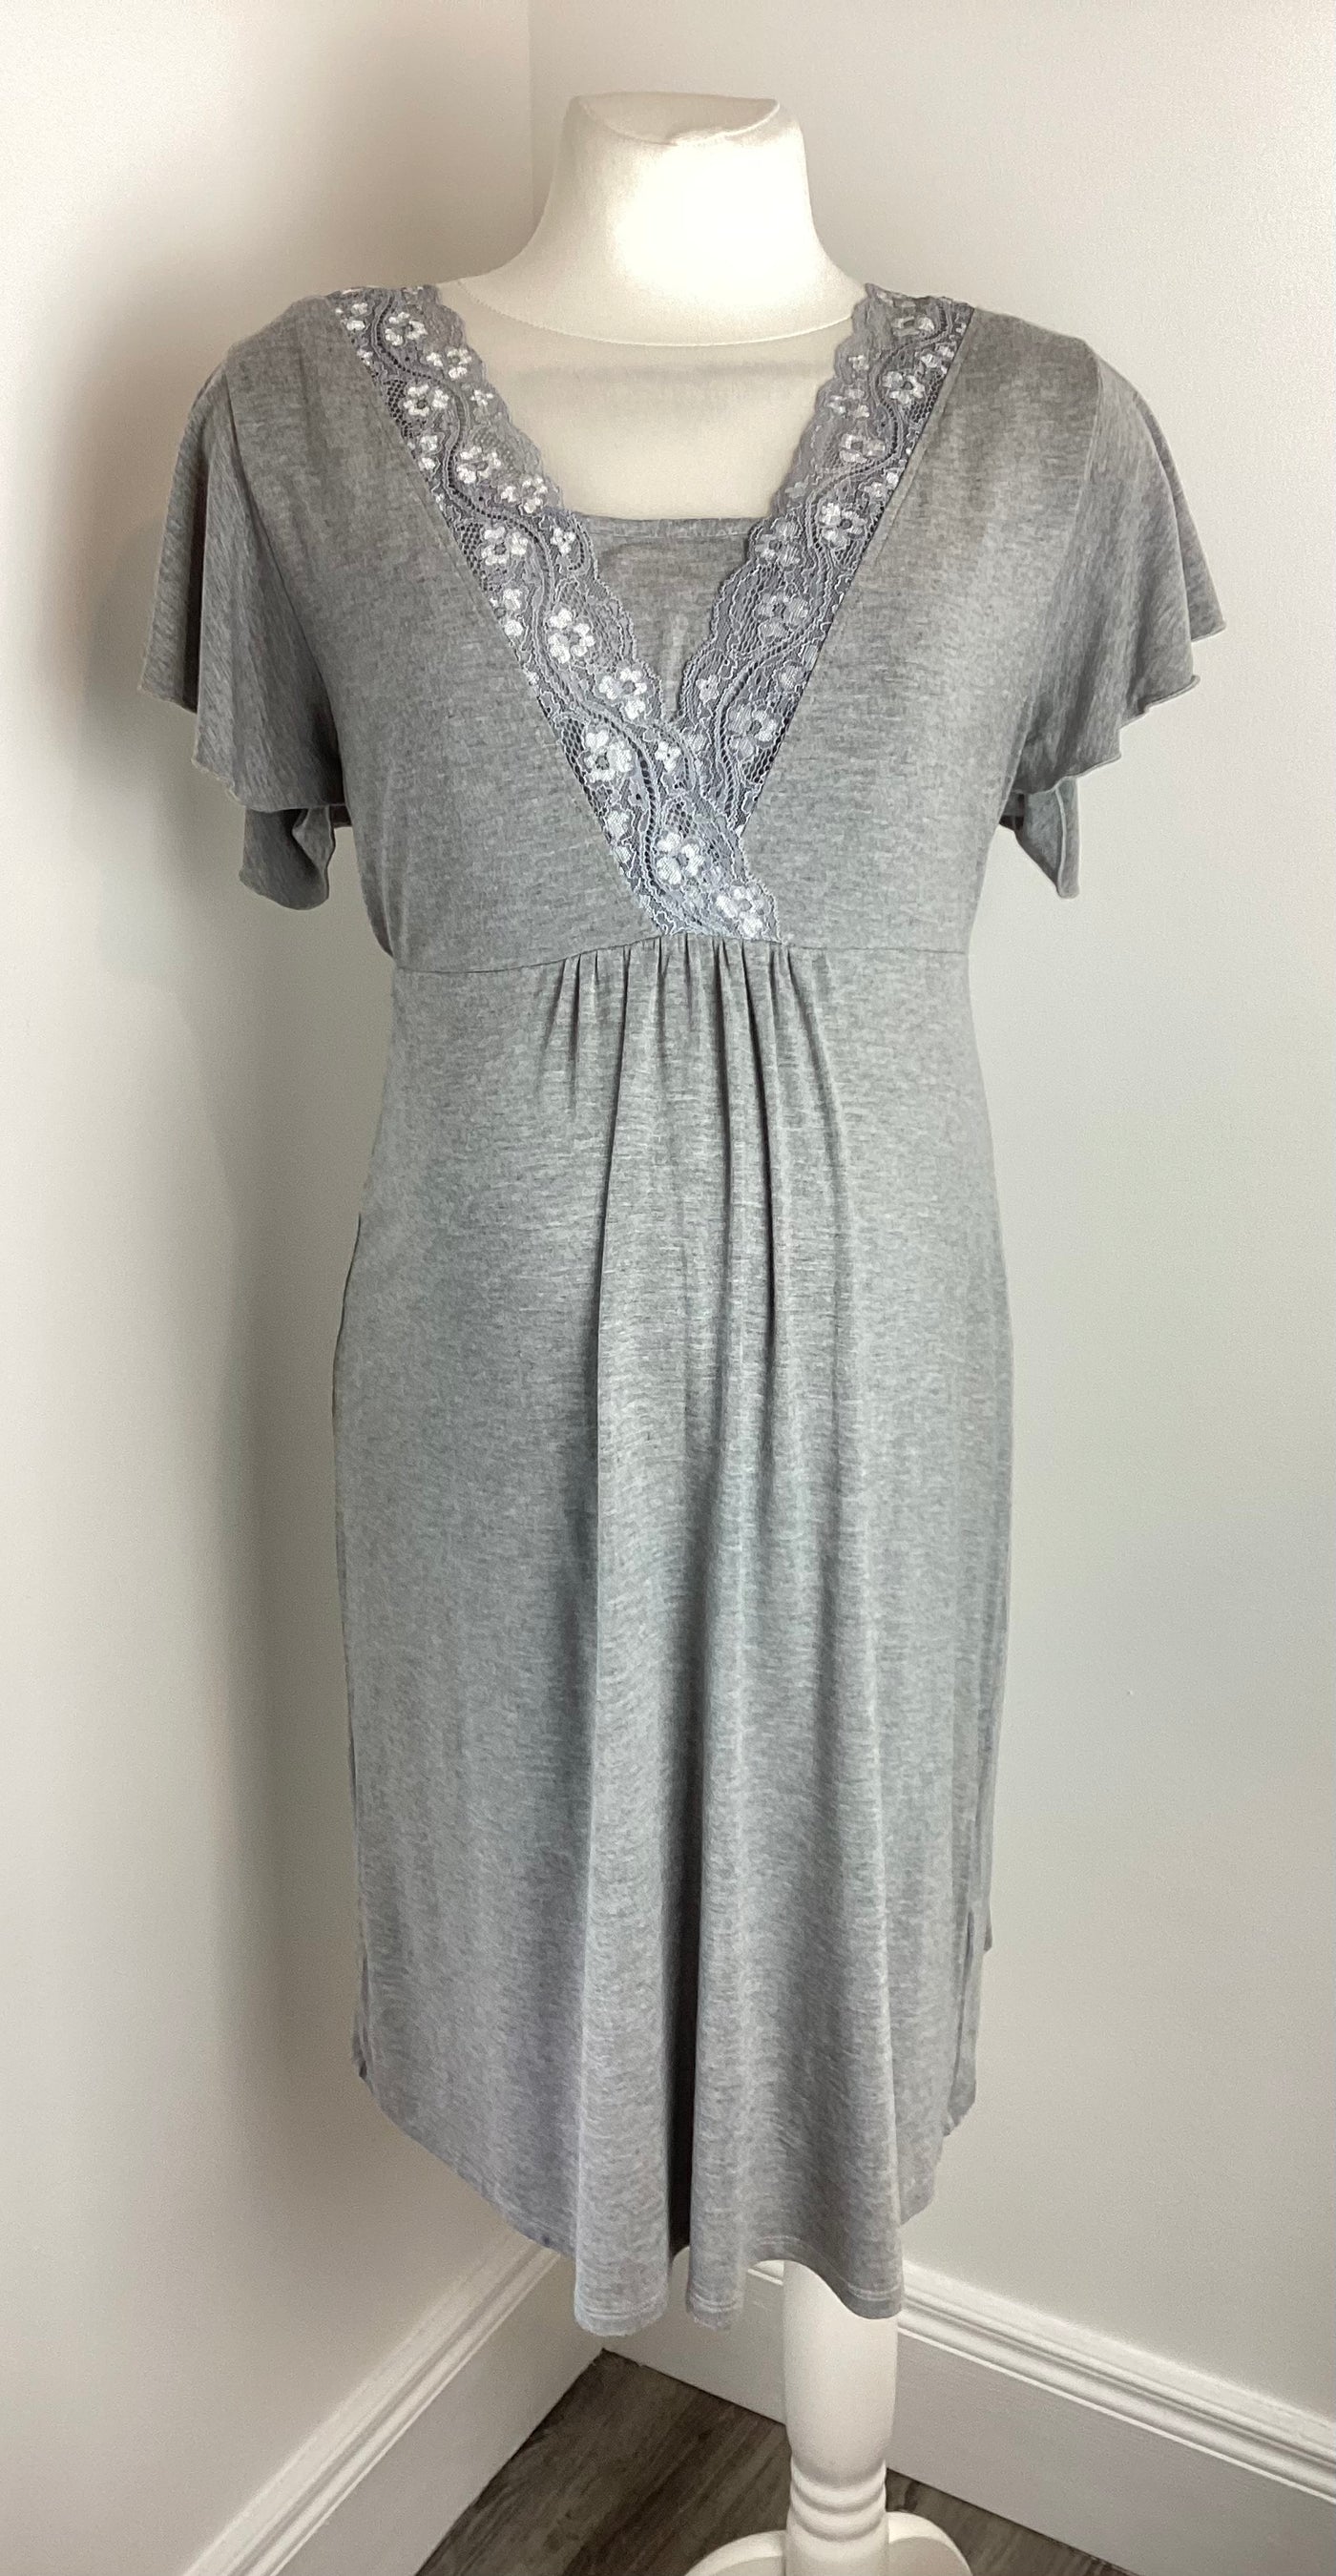 Seraphine Grey short sleeved lace trim nightdress - Size L (Approx  12/14)